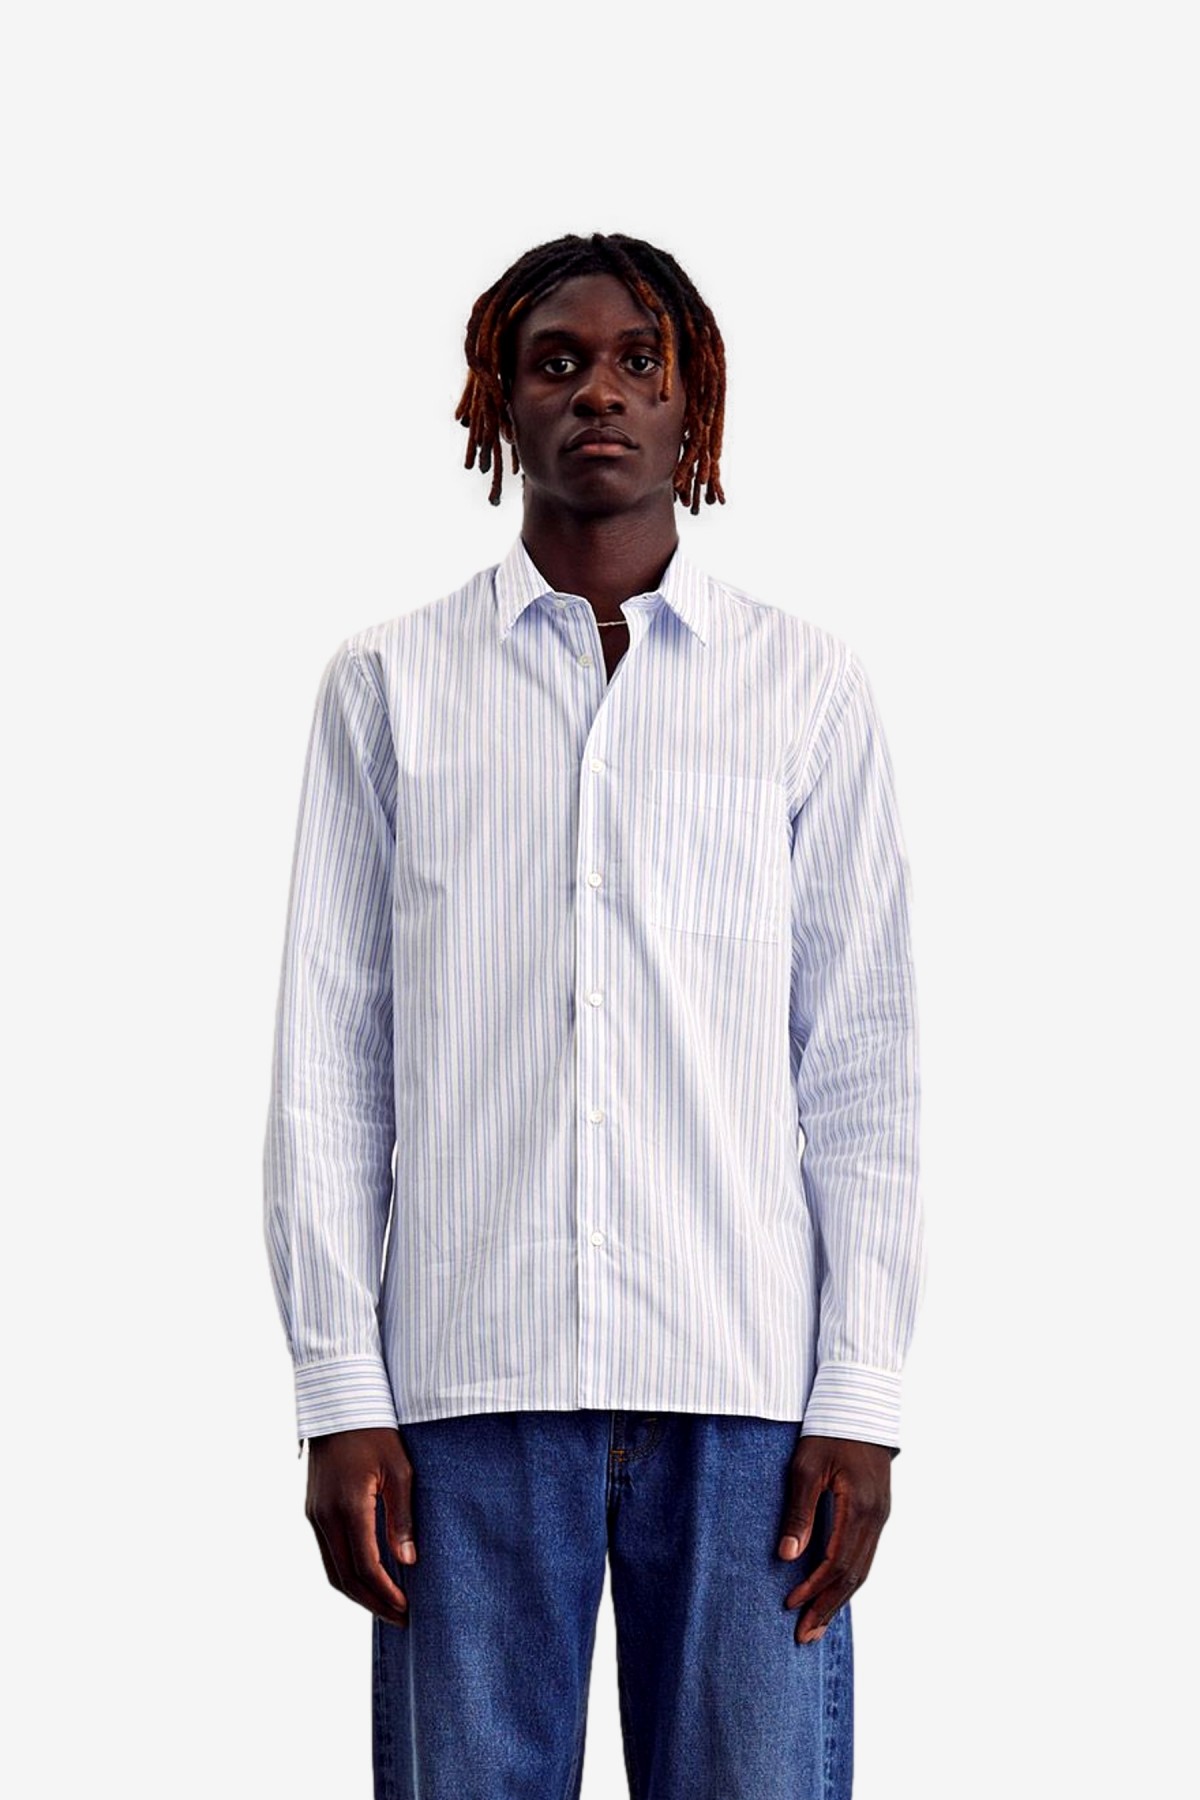 Another Aspect Shirt 3.0 in Hockney Stripe